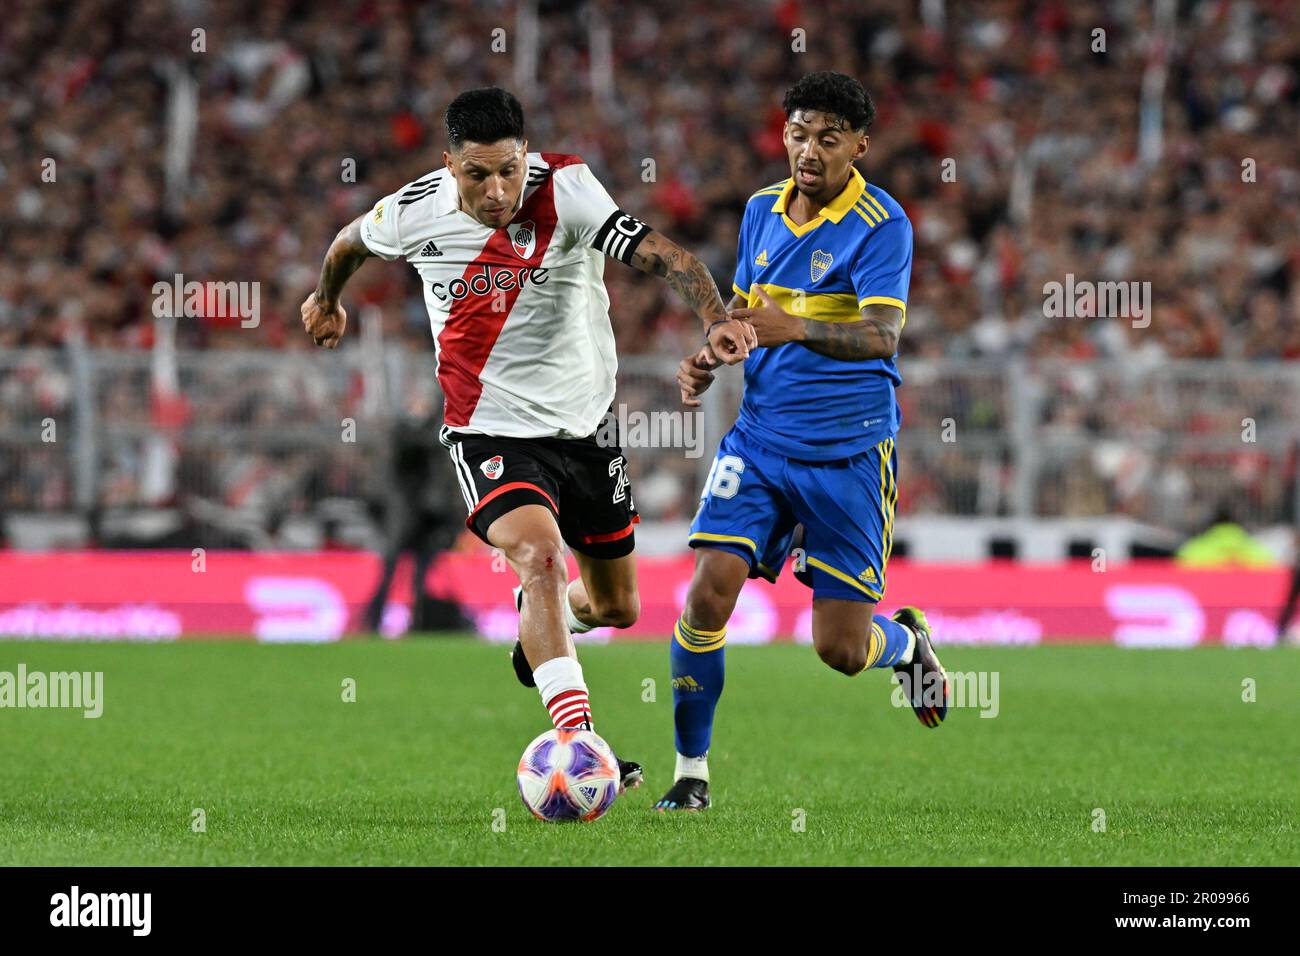 Buenos Aires, Argentina, 07th May, 2023. Enzo Perez of River Plate battles for possession with Cristian Medina of Boca Juniors, during the match between River Plate and Boca Juniors, for the Argentinian championship 2023, at Monumental de Nunez Stadium, in Buenos Aires on May 07. Photo: Luciano Bisbal/DiaEsportivo/Alamy Live News Stock Photo